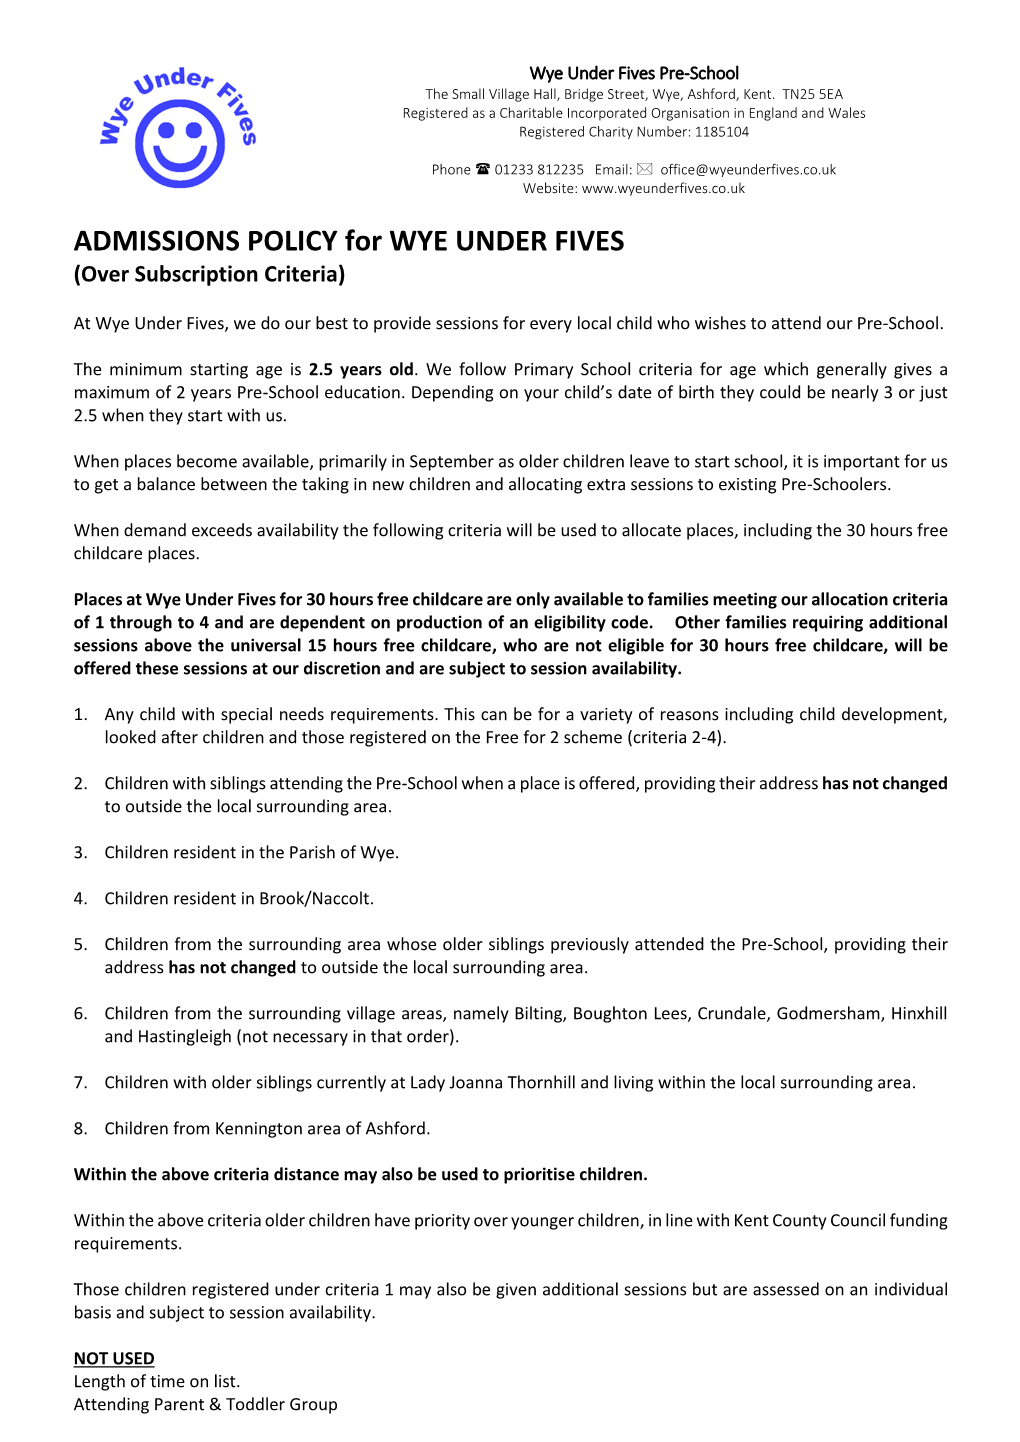 ADMISSIONS POLICY for WYE UNDER FIVES (Over Subscription Criteria)